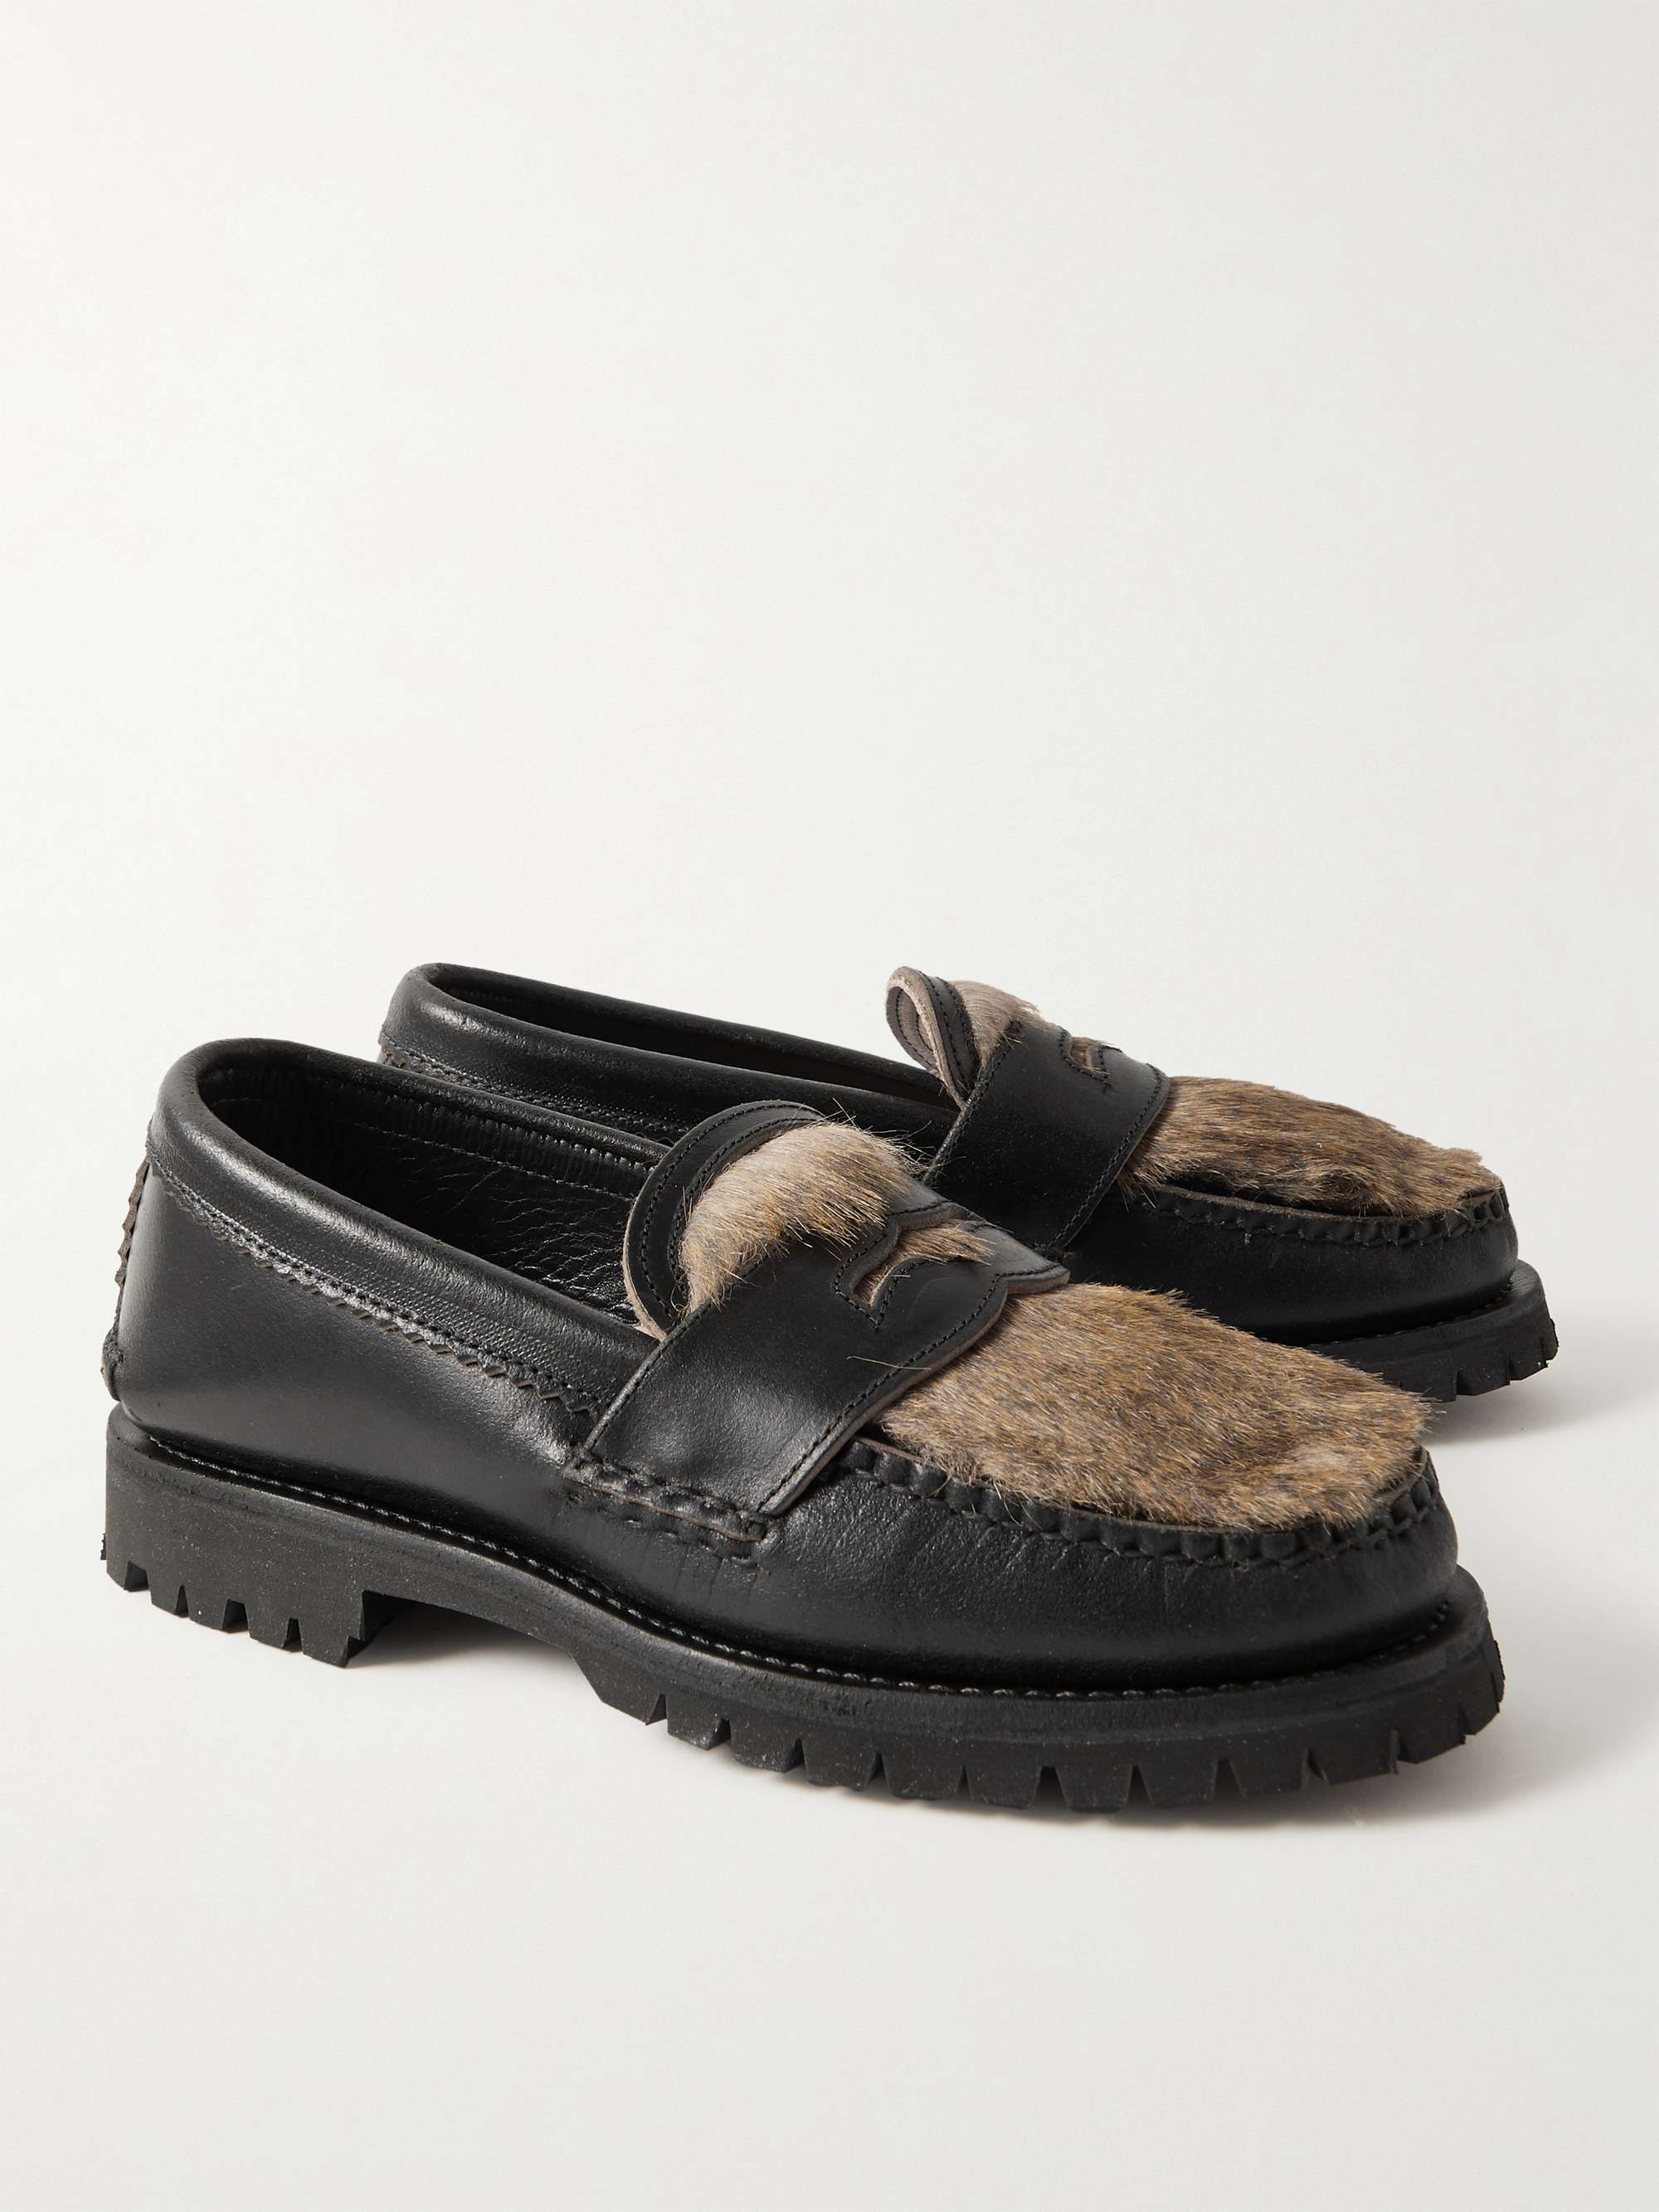 YUKETEN Leather and Faux Fur Penny Loafers for Men | MR PORTER